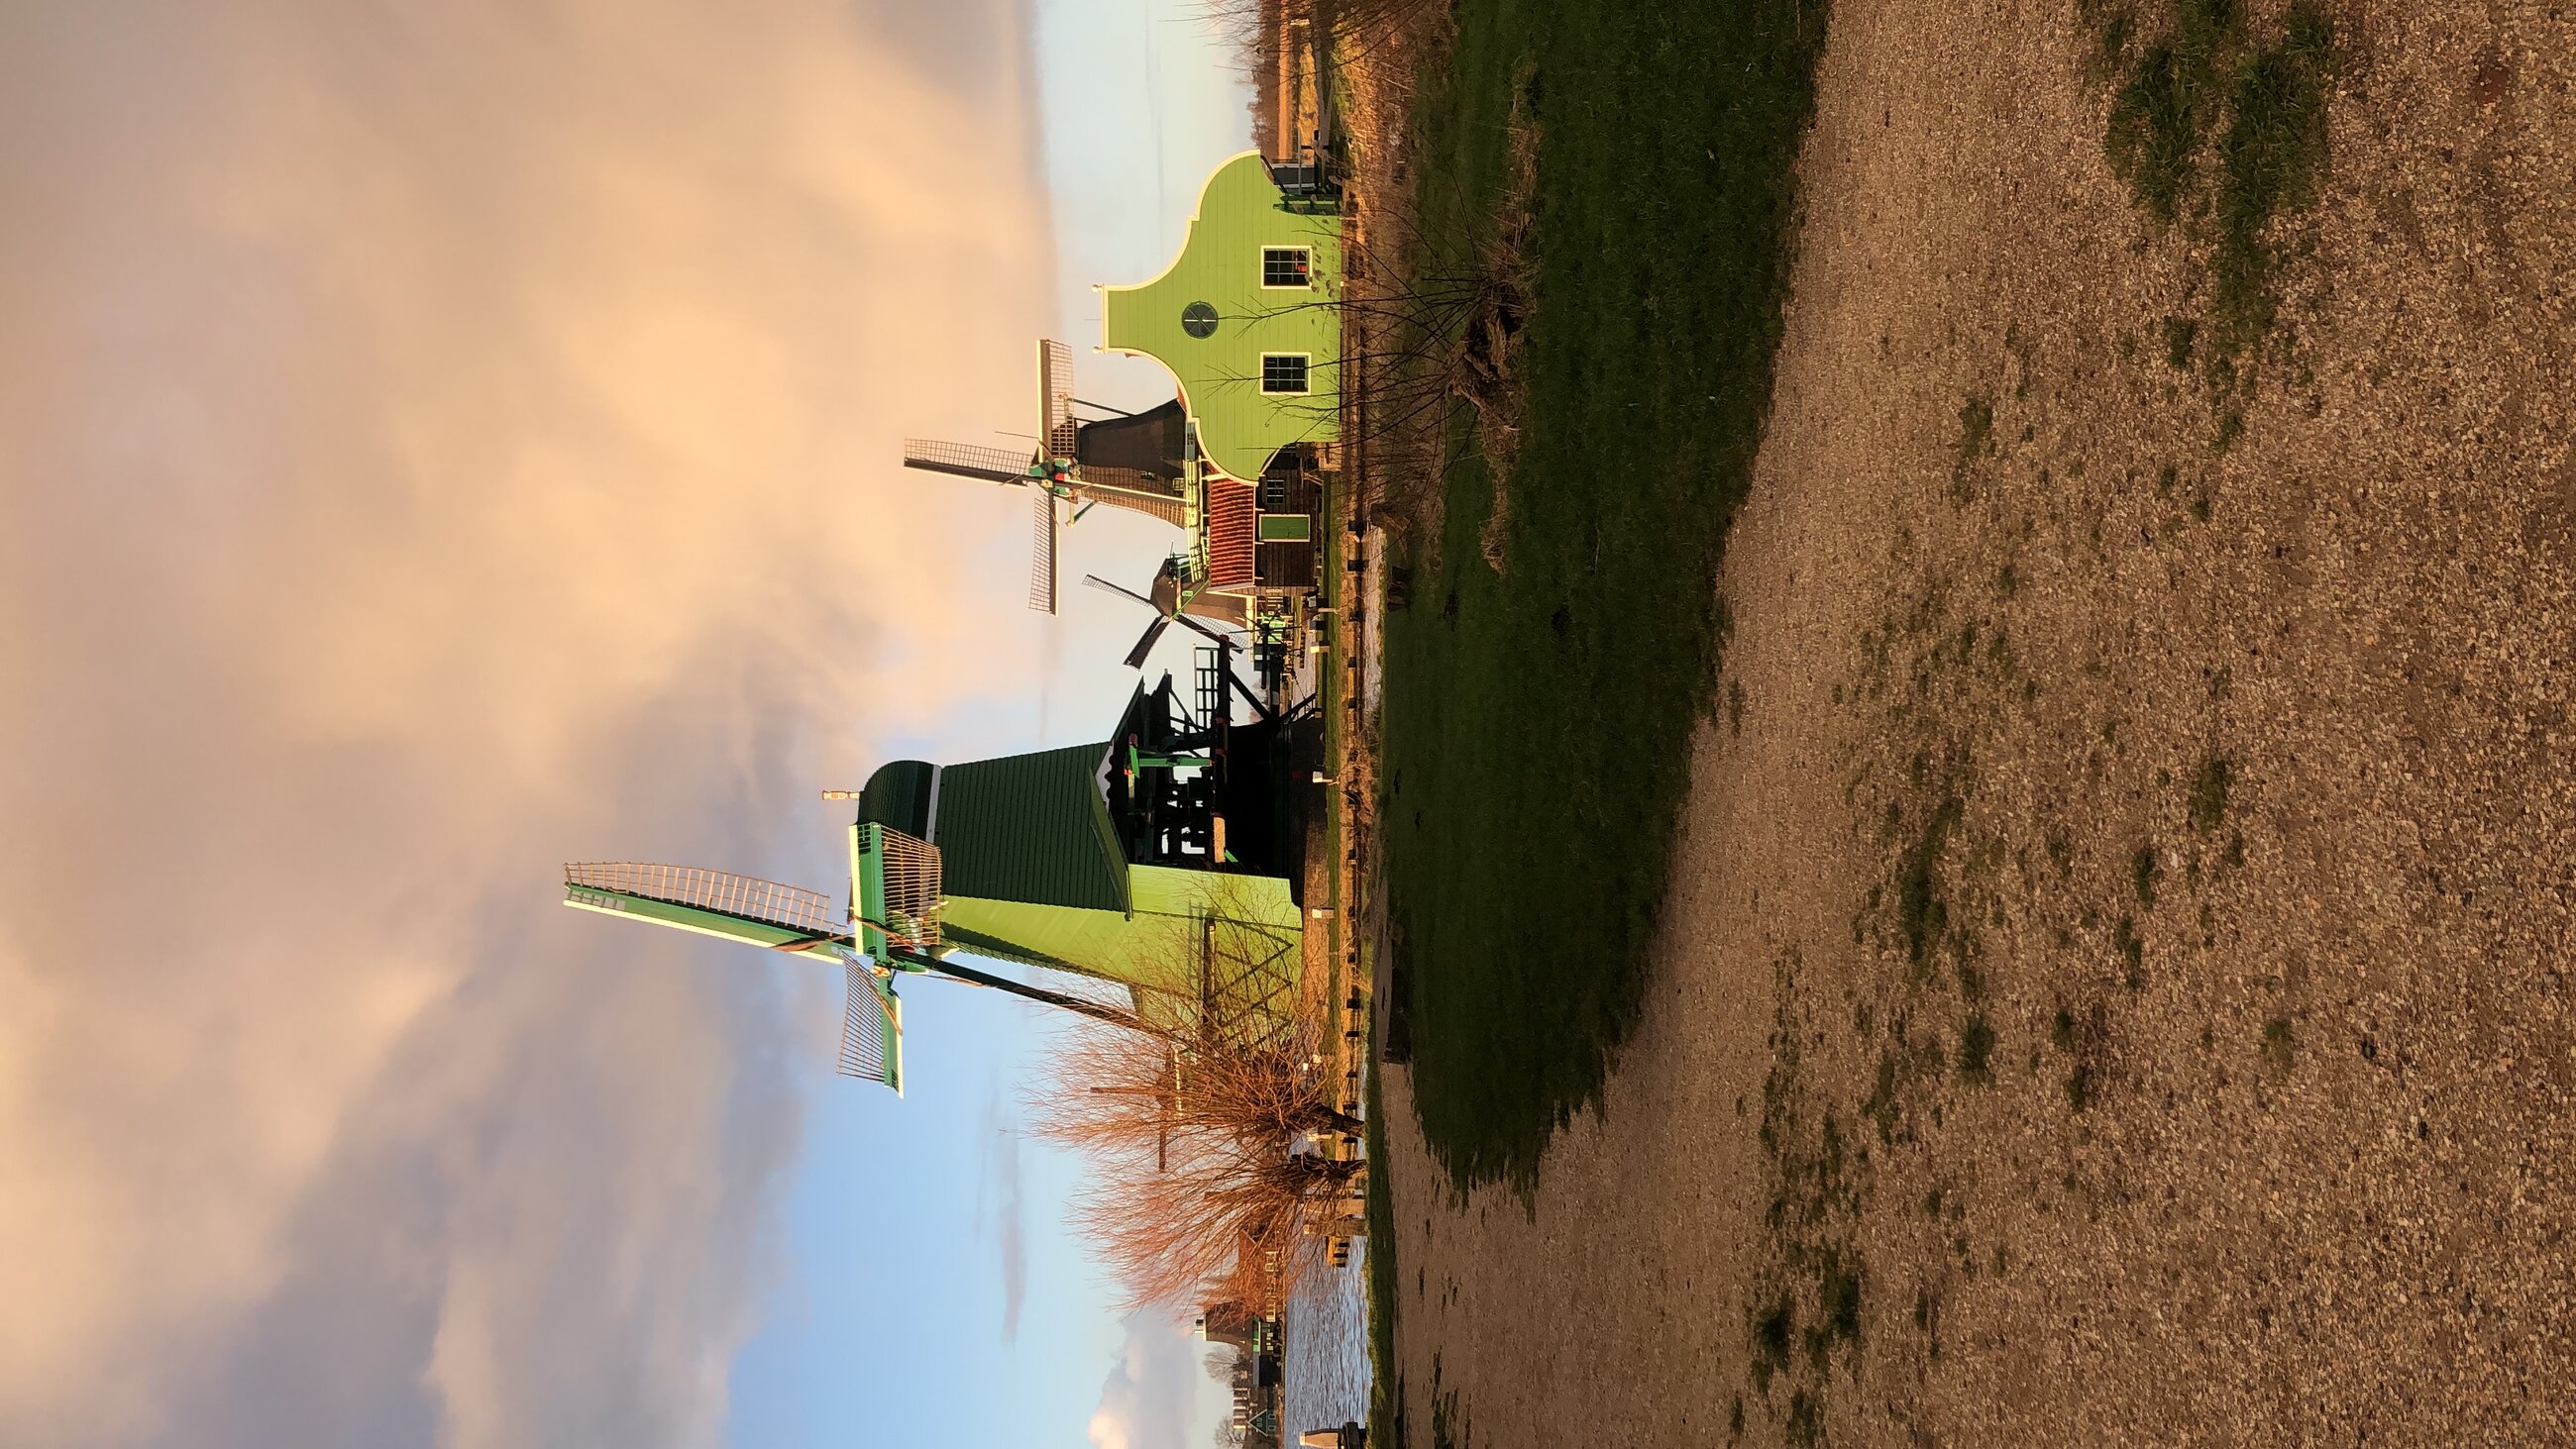 Dutch windmills are a must-see